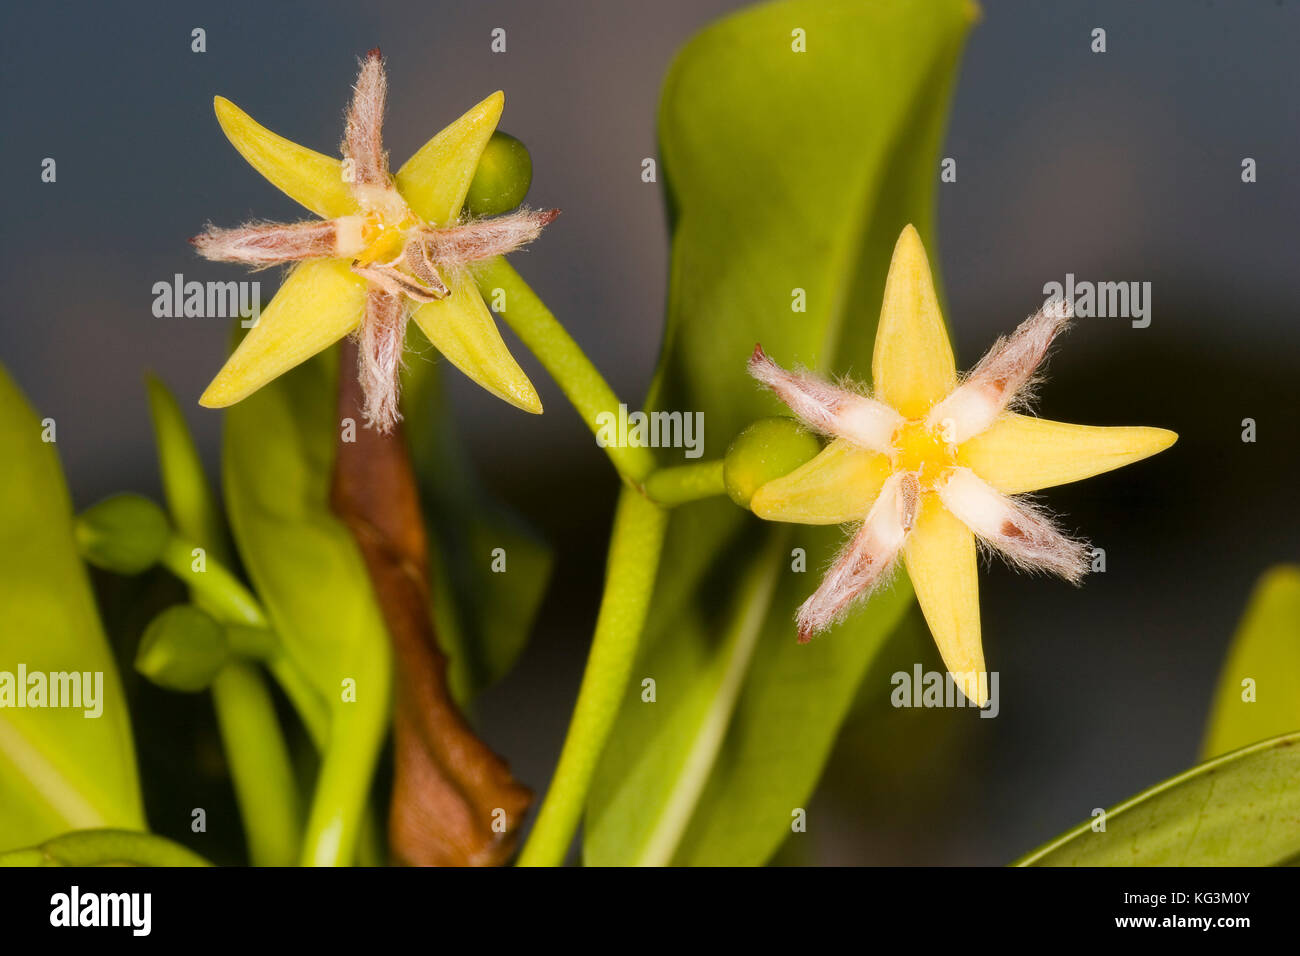 Red Mangrove, Rhizophora mangle flowers are thought to be self pollinated or wind pollinated. Following fertilization, mangrove propagules undergo con Stock Photo